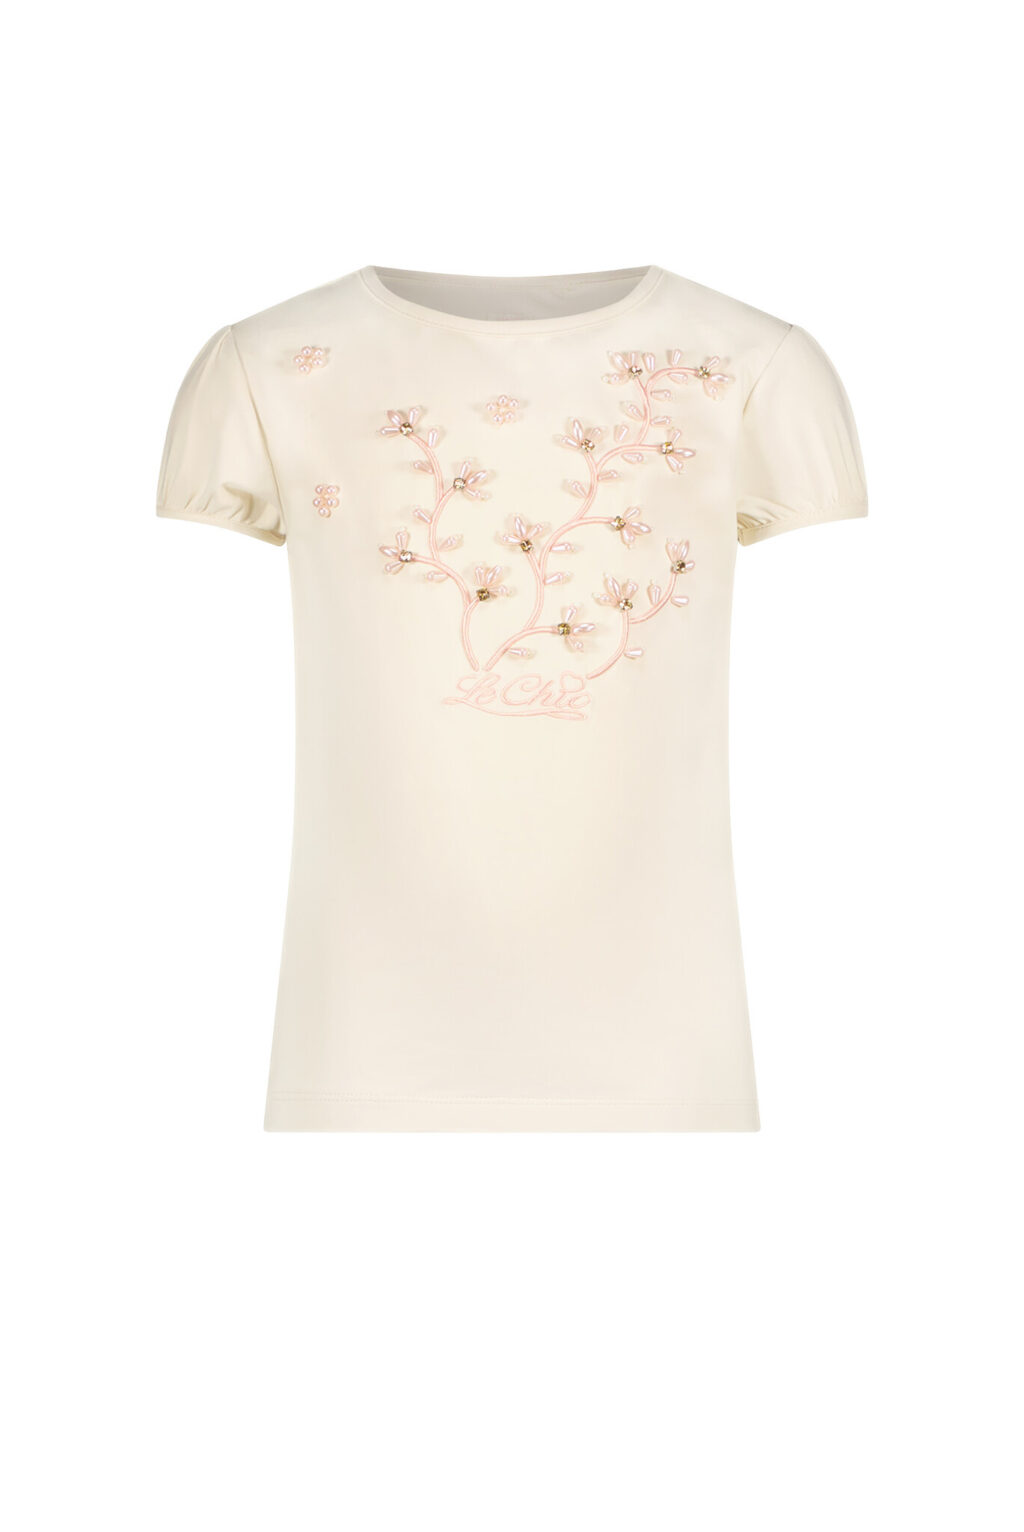 Le Chic Meisjes t-shirt luxe bloemen - Nommy - Pearled ivoor wit ~ Spinze.nl